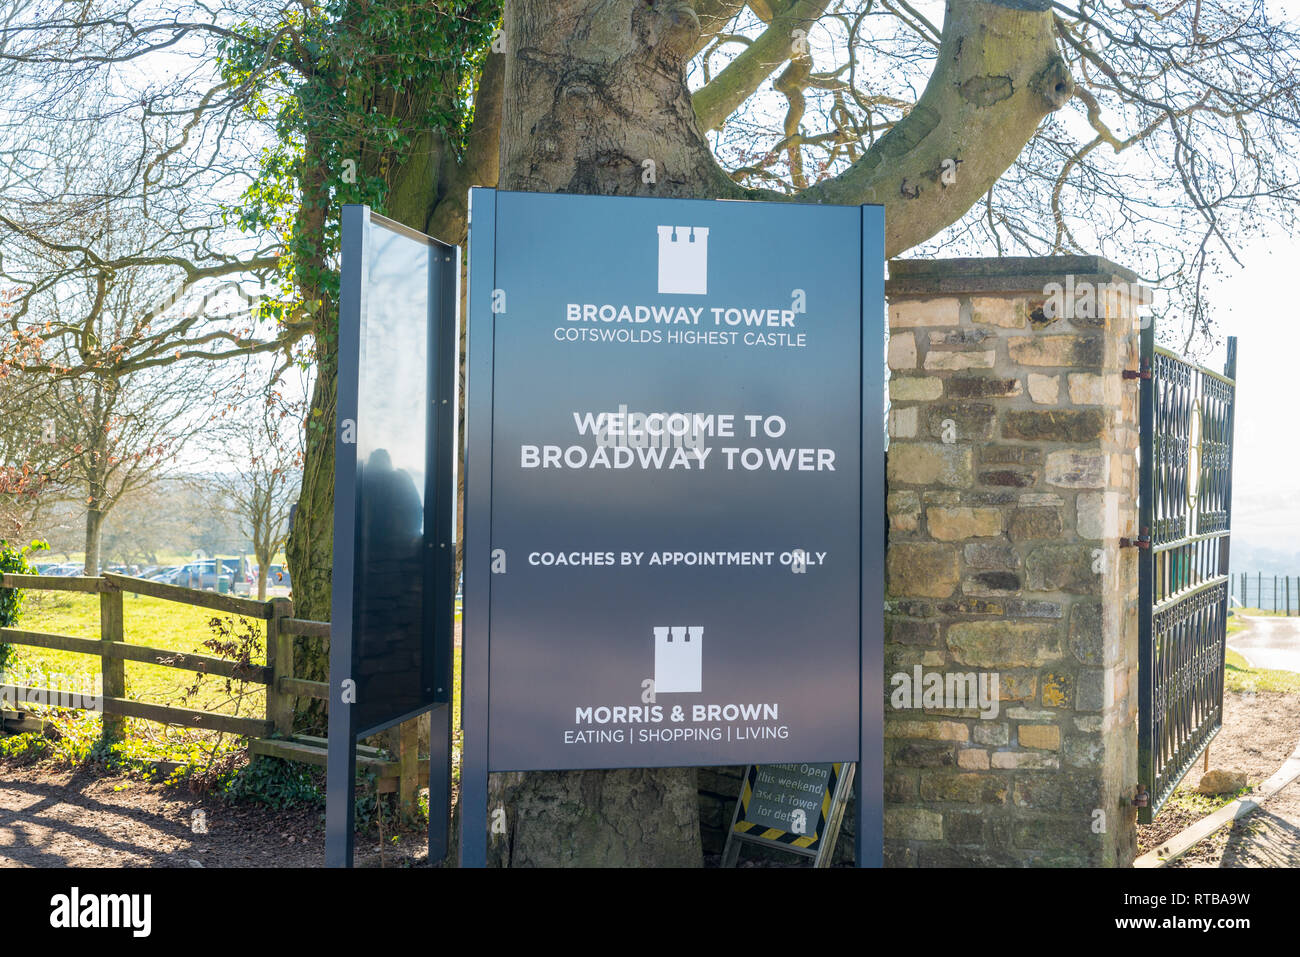 Sign at entrance to Broadway Tower in Worcestershire which is is a Capability Brown folly and is the highest tower in the cotswolds. Stock Photo